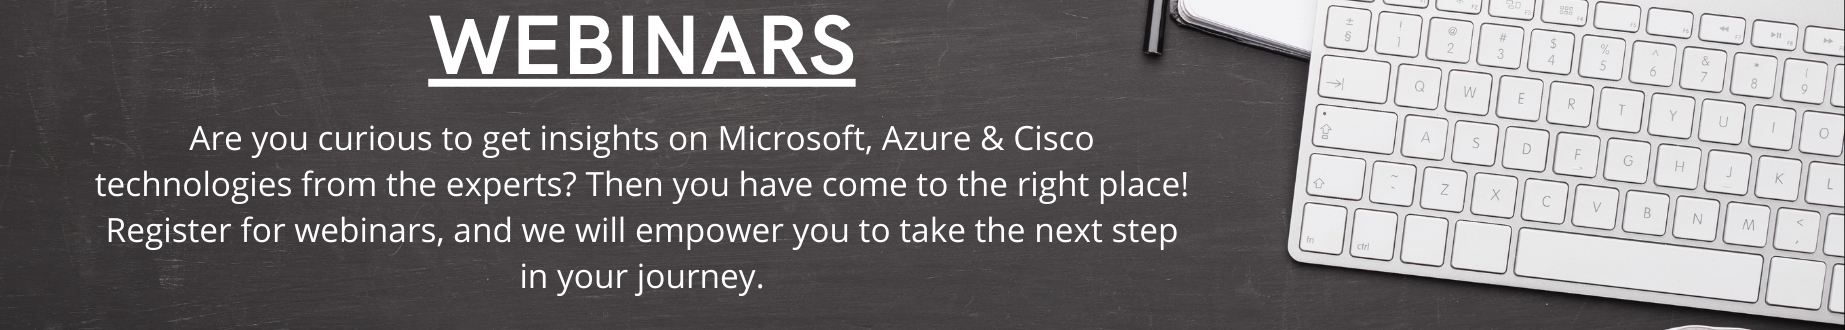 YOUR BUSINESS. YOUR CLOUD. YOUR TERMS. WITH MICROSOFT AZURE!